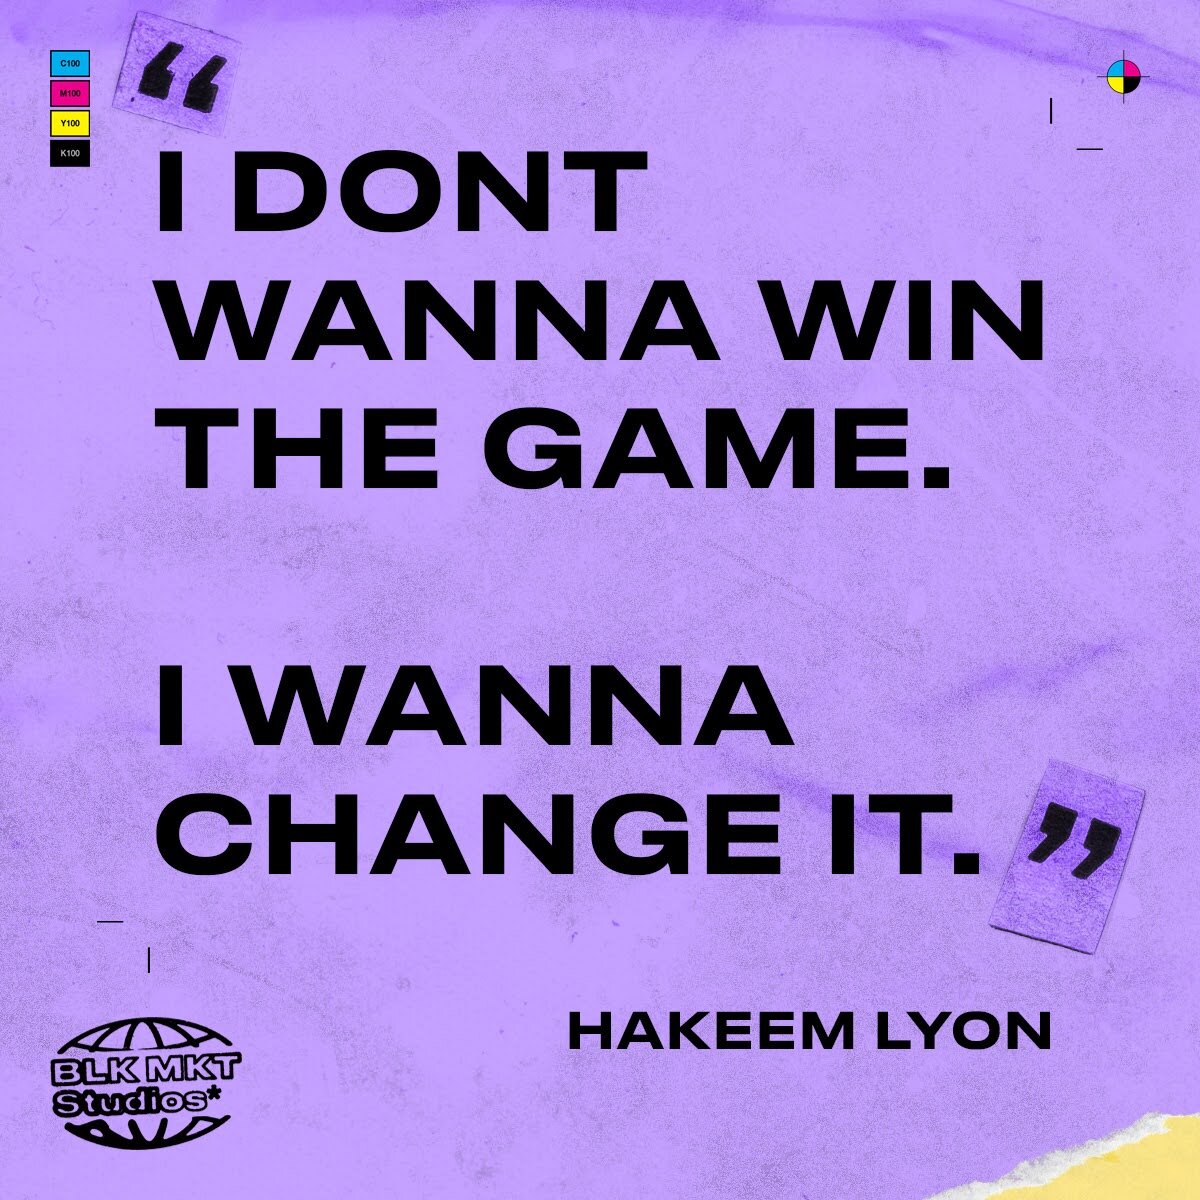 Hakeem Lyon, from the TV show &quot;Empire,&quot; embodies the spirit of a young, ambitious artist struggling with his identity and legacy within his family's music empire. 

This quote reflects a desire not merely to succeed within the established n